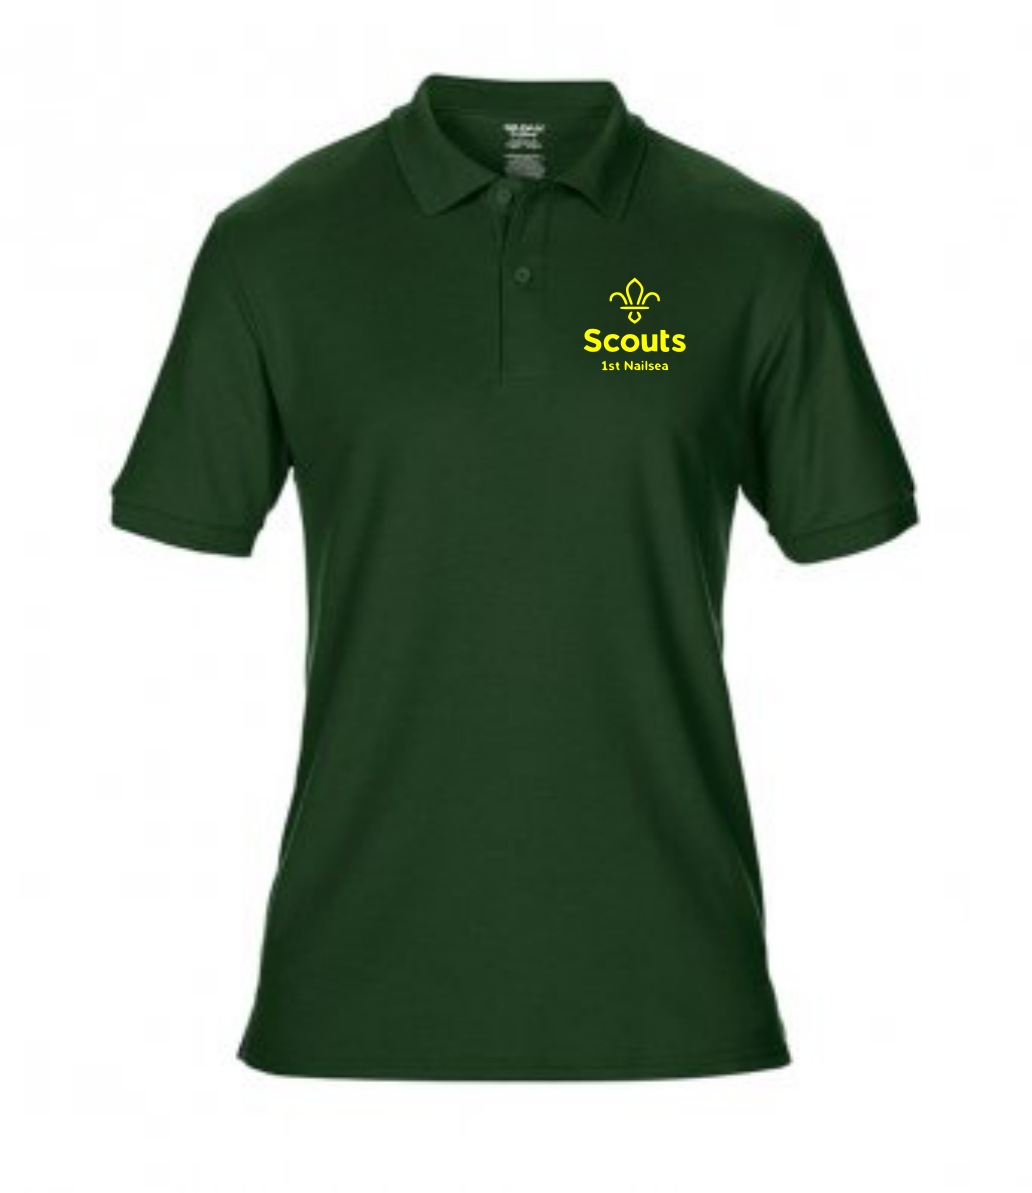 1st Nailsea Scout Group Polo Shirt